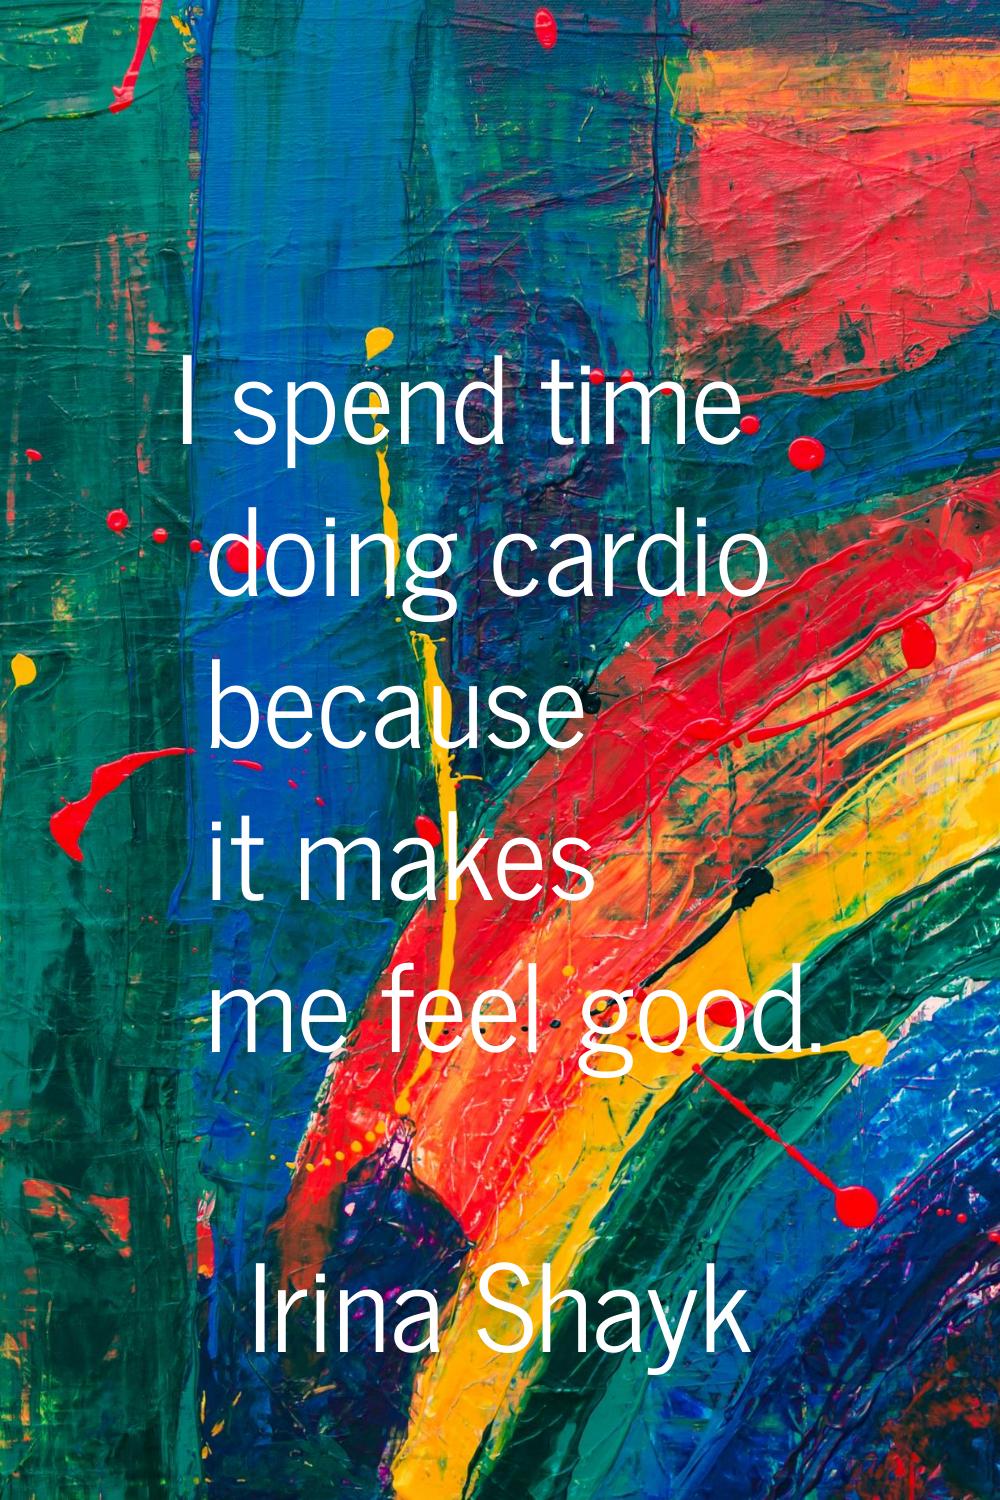 I spend time doing cardio because it makes me feel good.